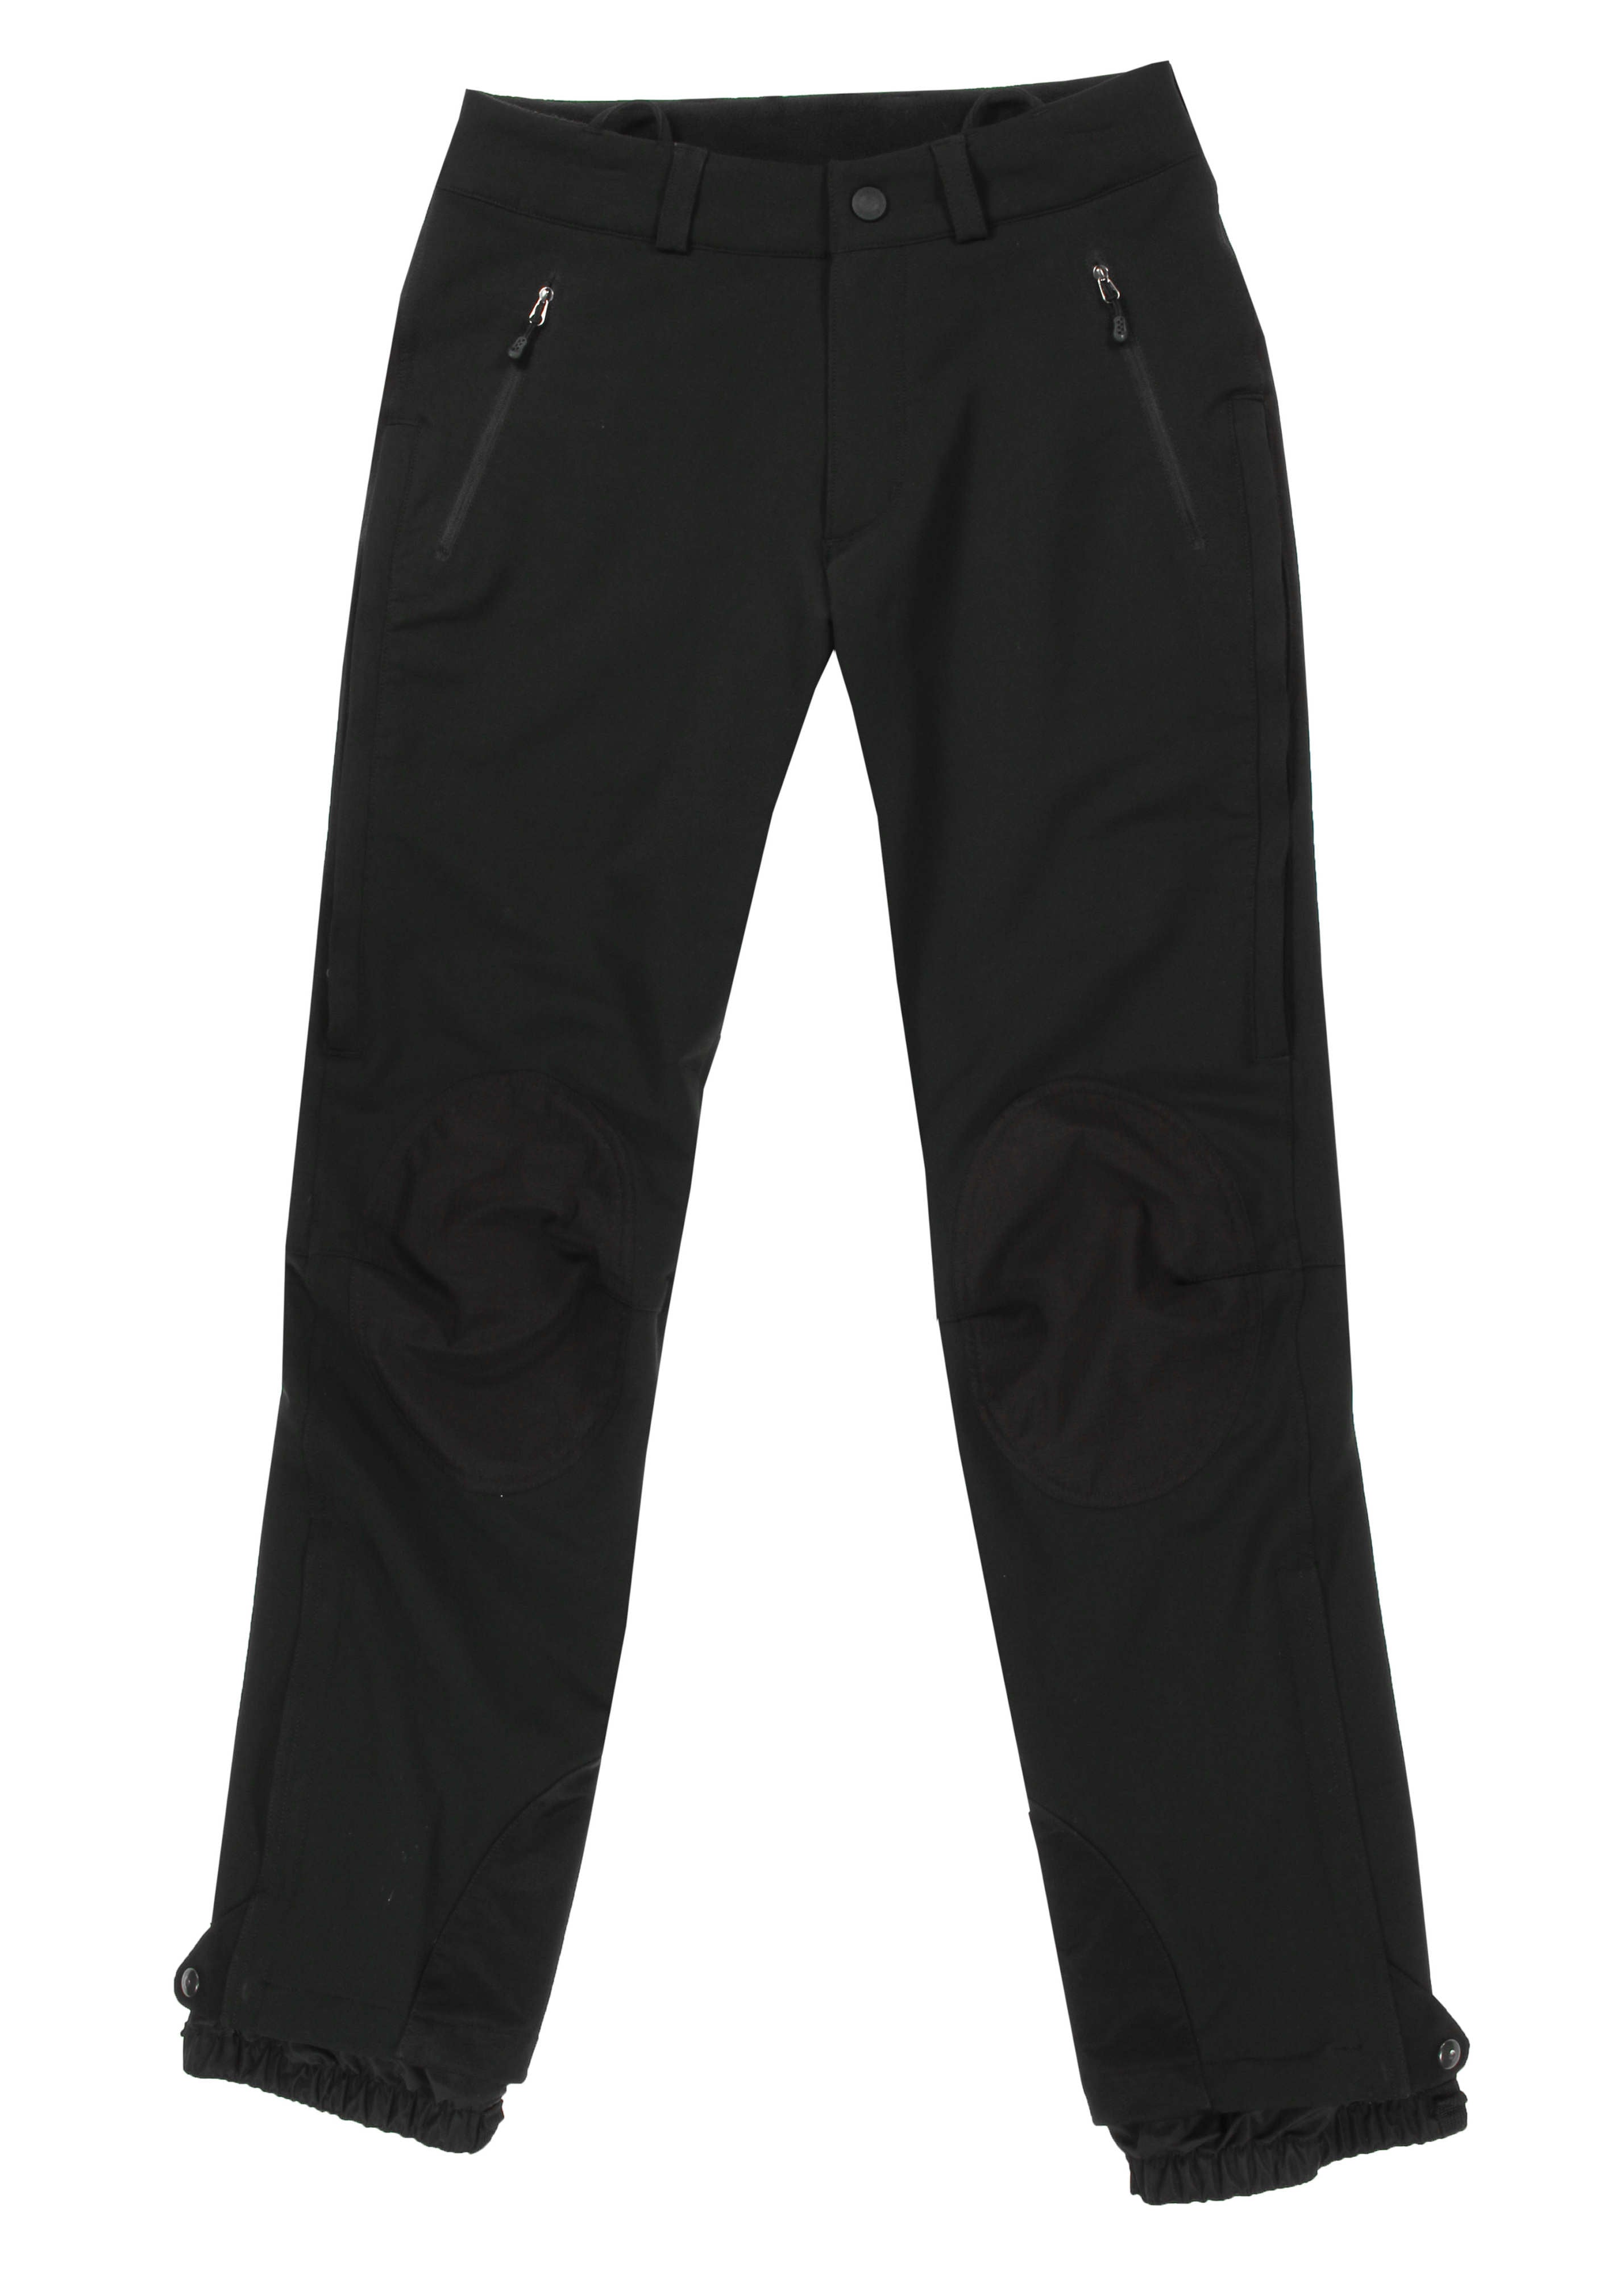 W's Backcountry Guide Pants